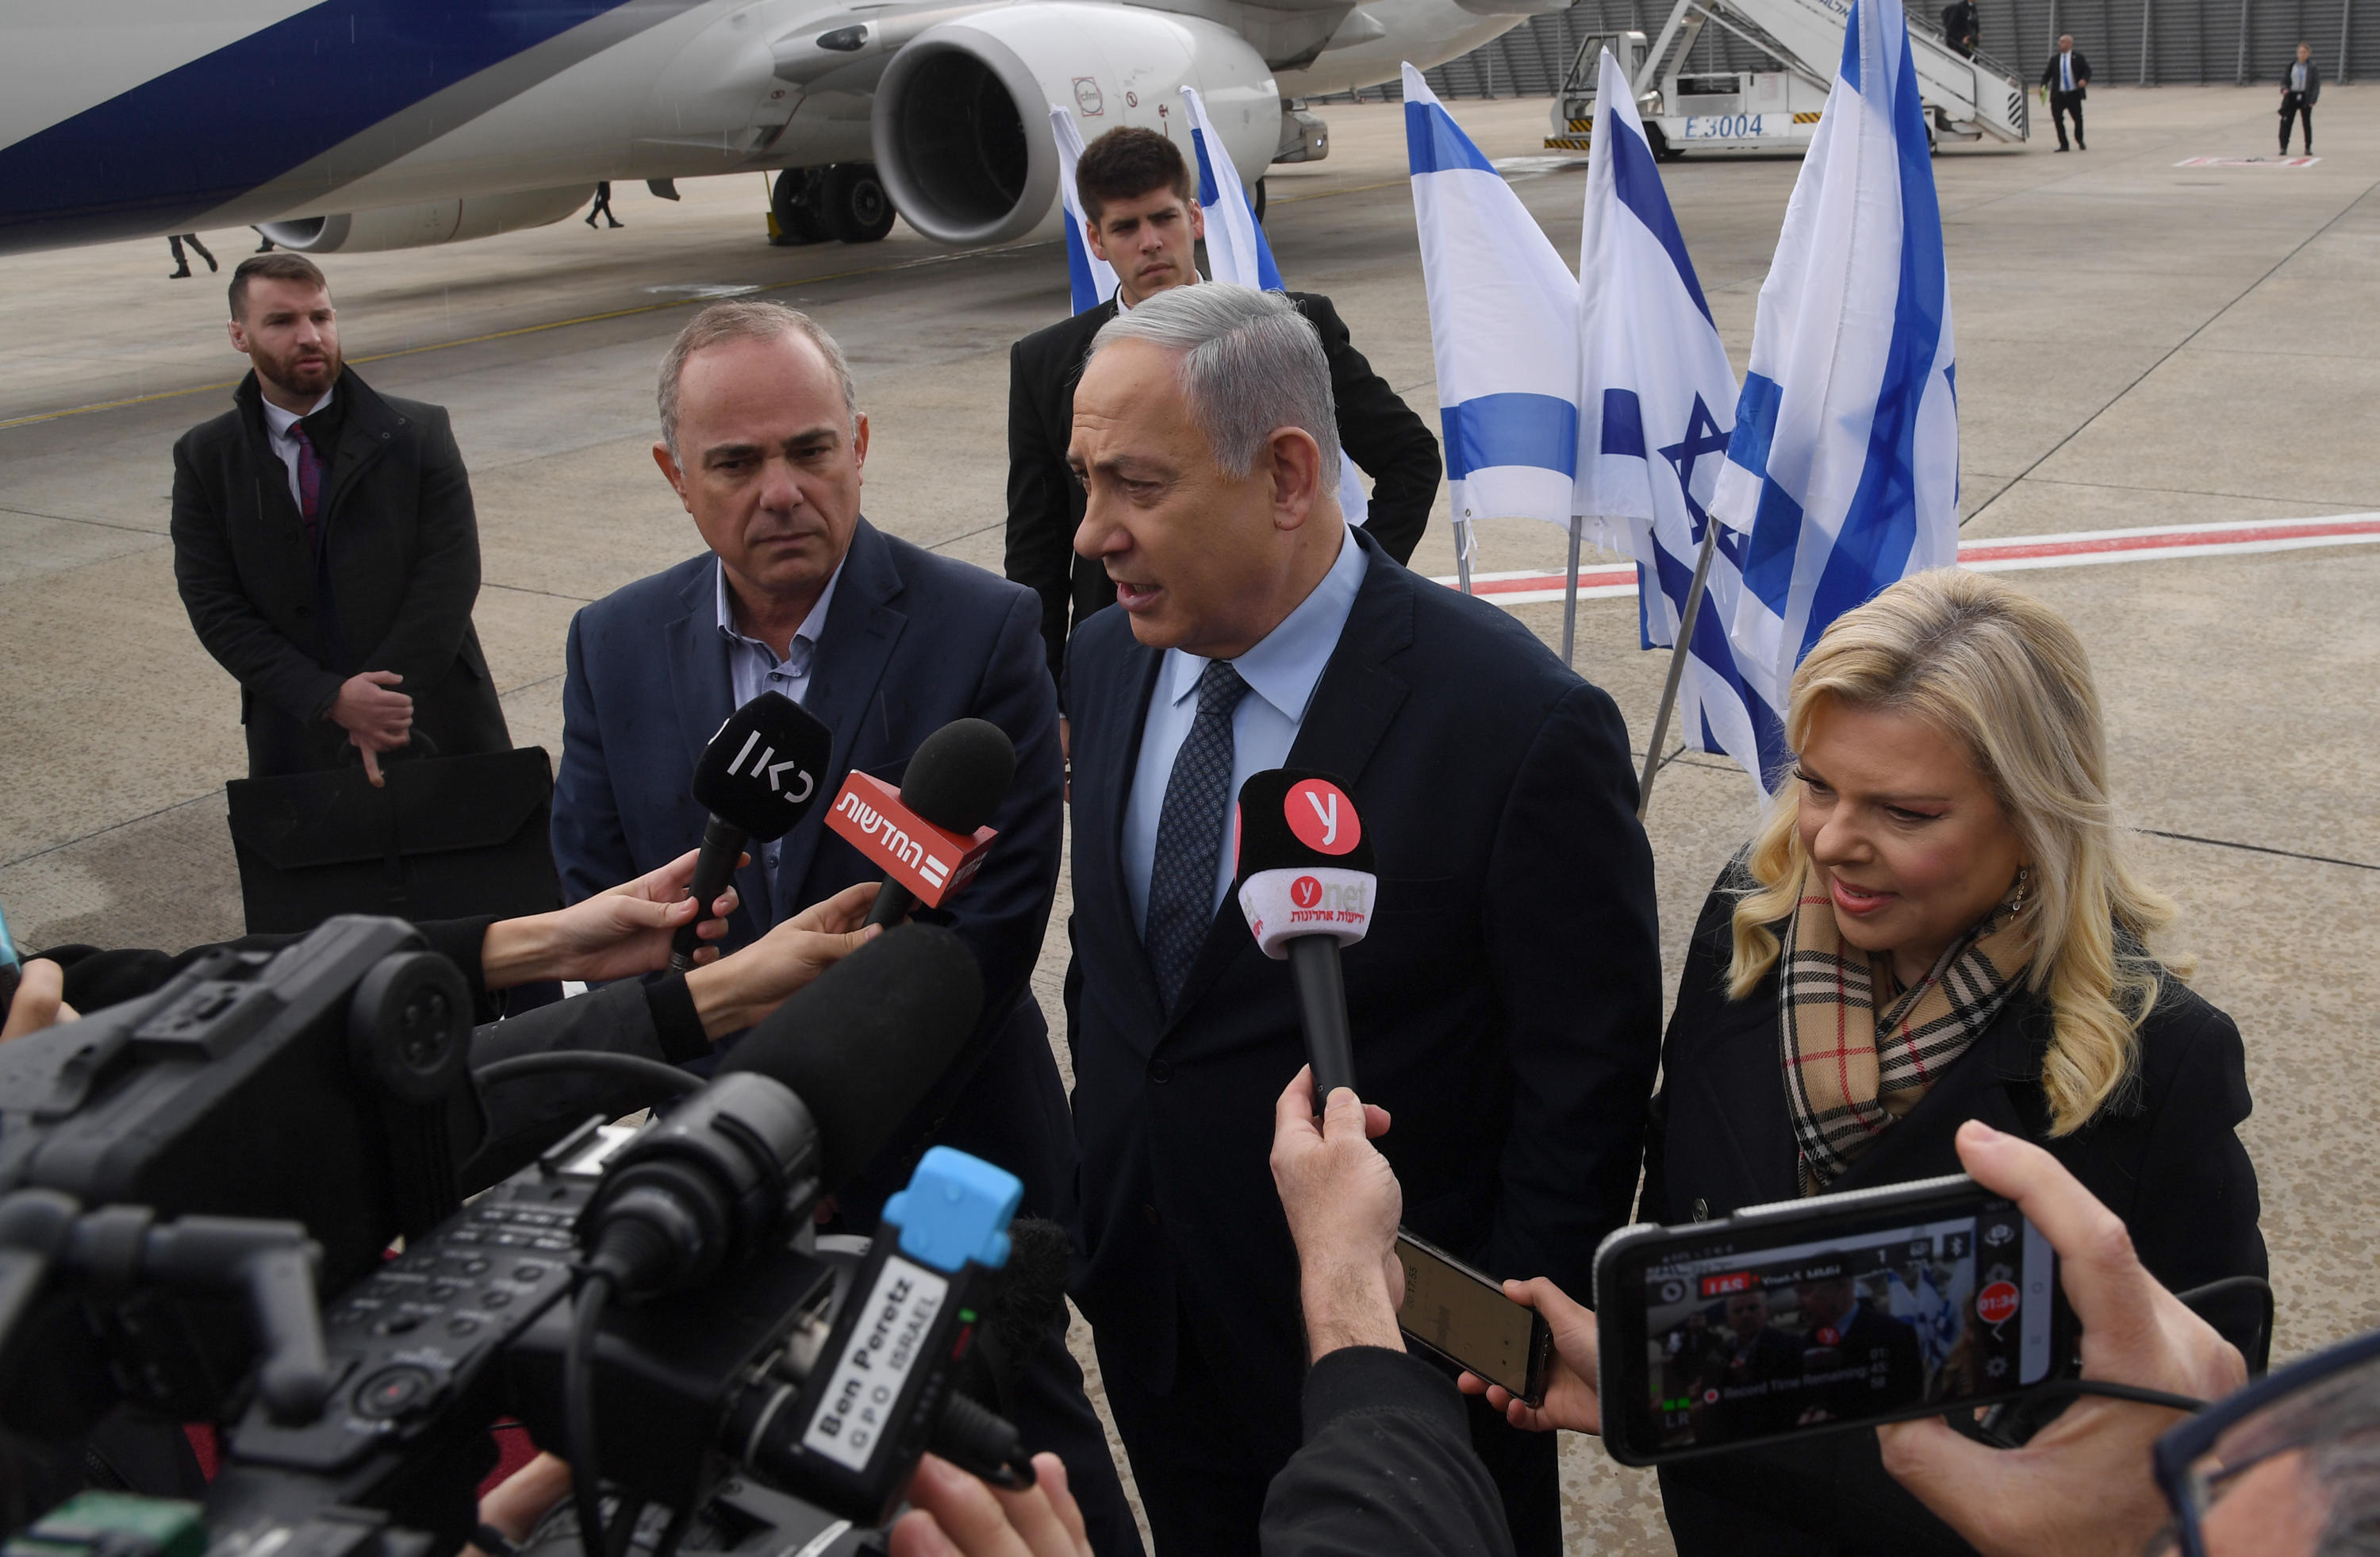 Netanyahu and Delegation Departing for Greece